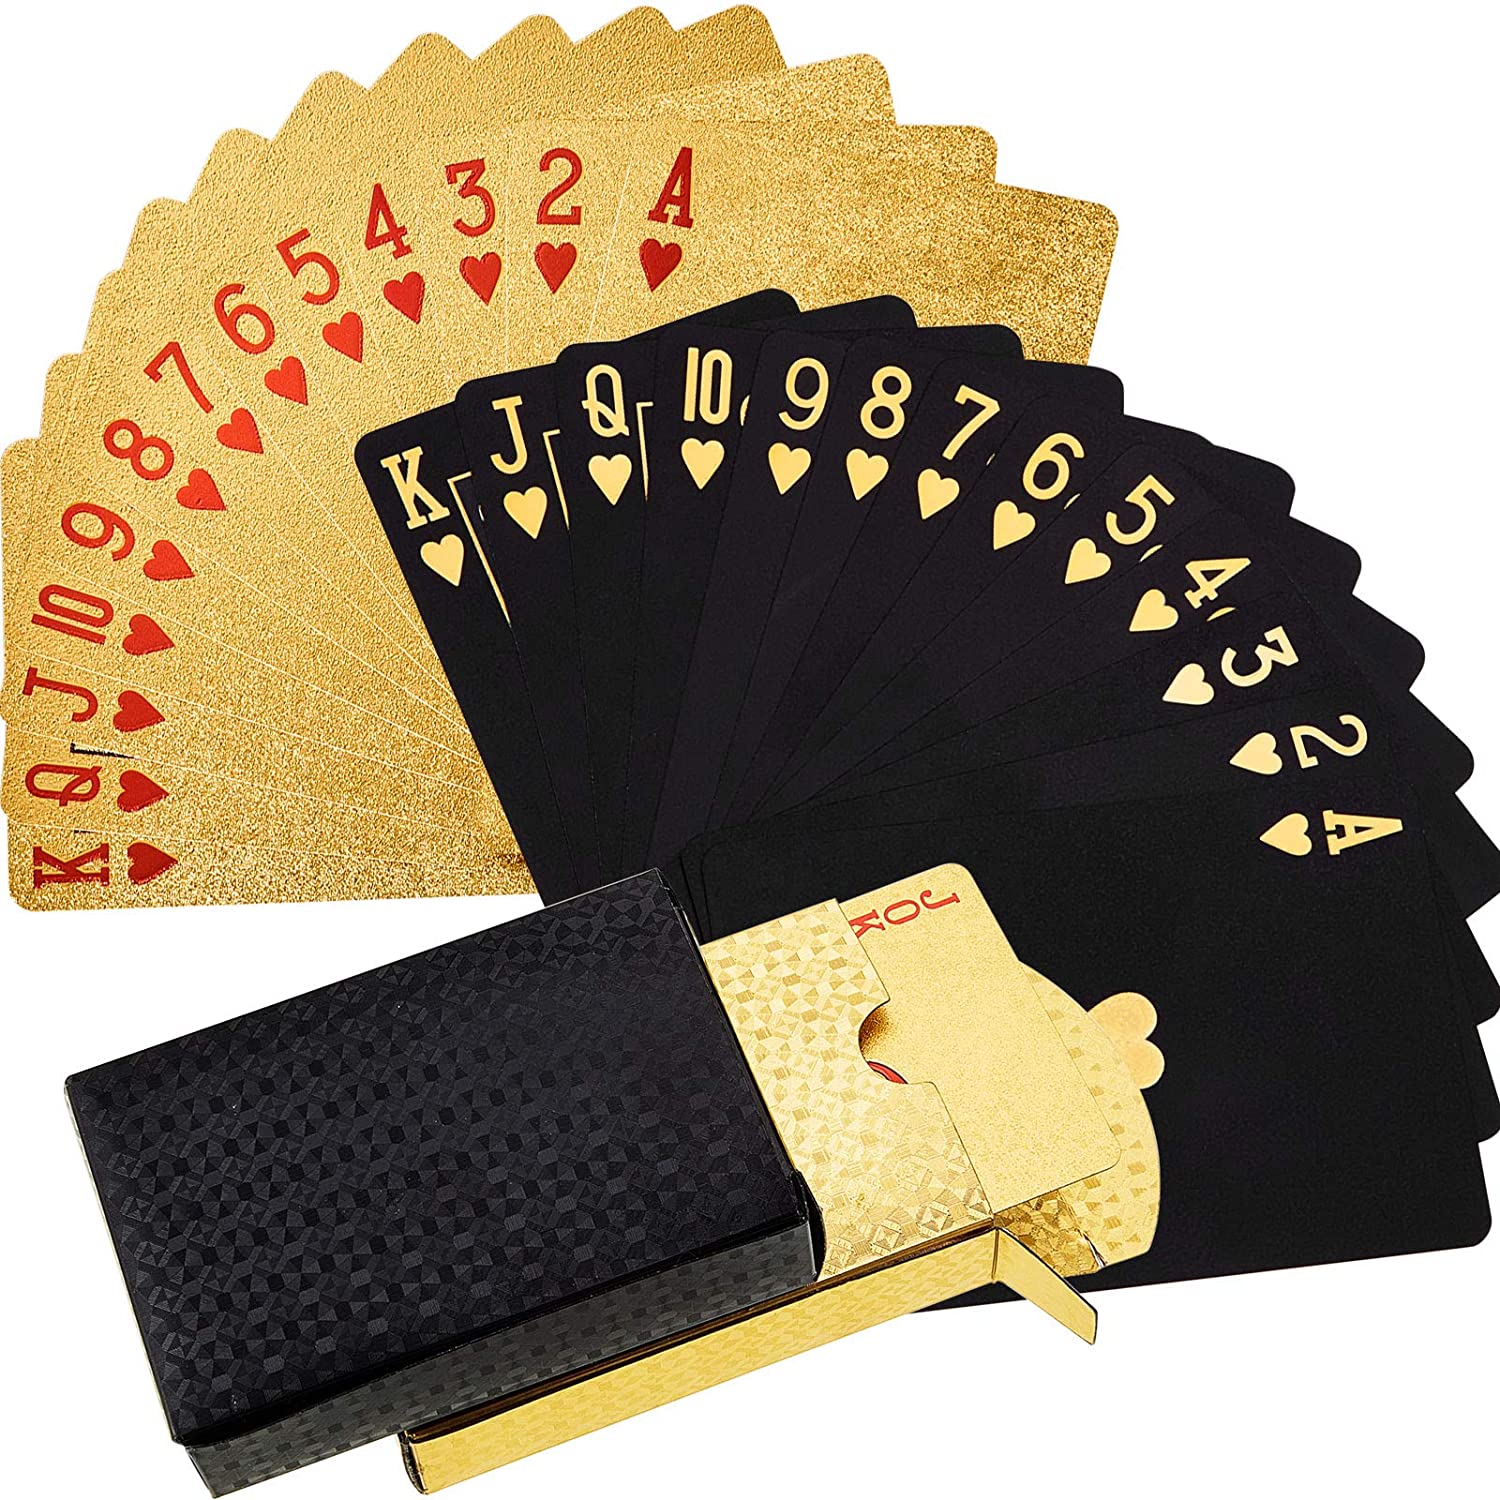 Gold Silver Black Great Flexibility and Durability Pool Beach Water Card Games Standard Poker Cards for for Magic Props ZONFIG Waterproof Playing Cards 